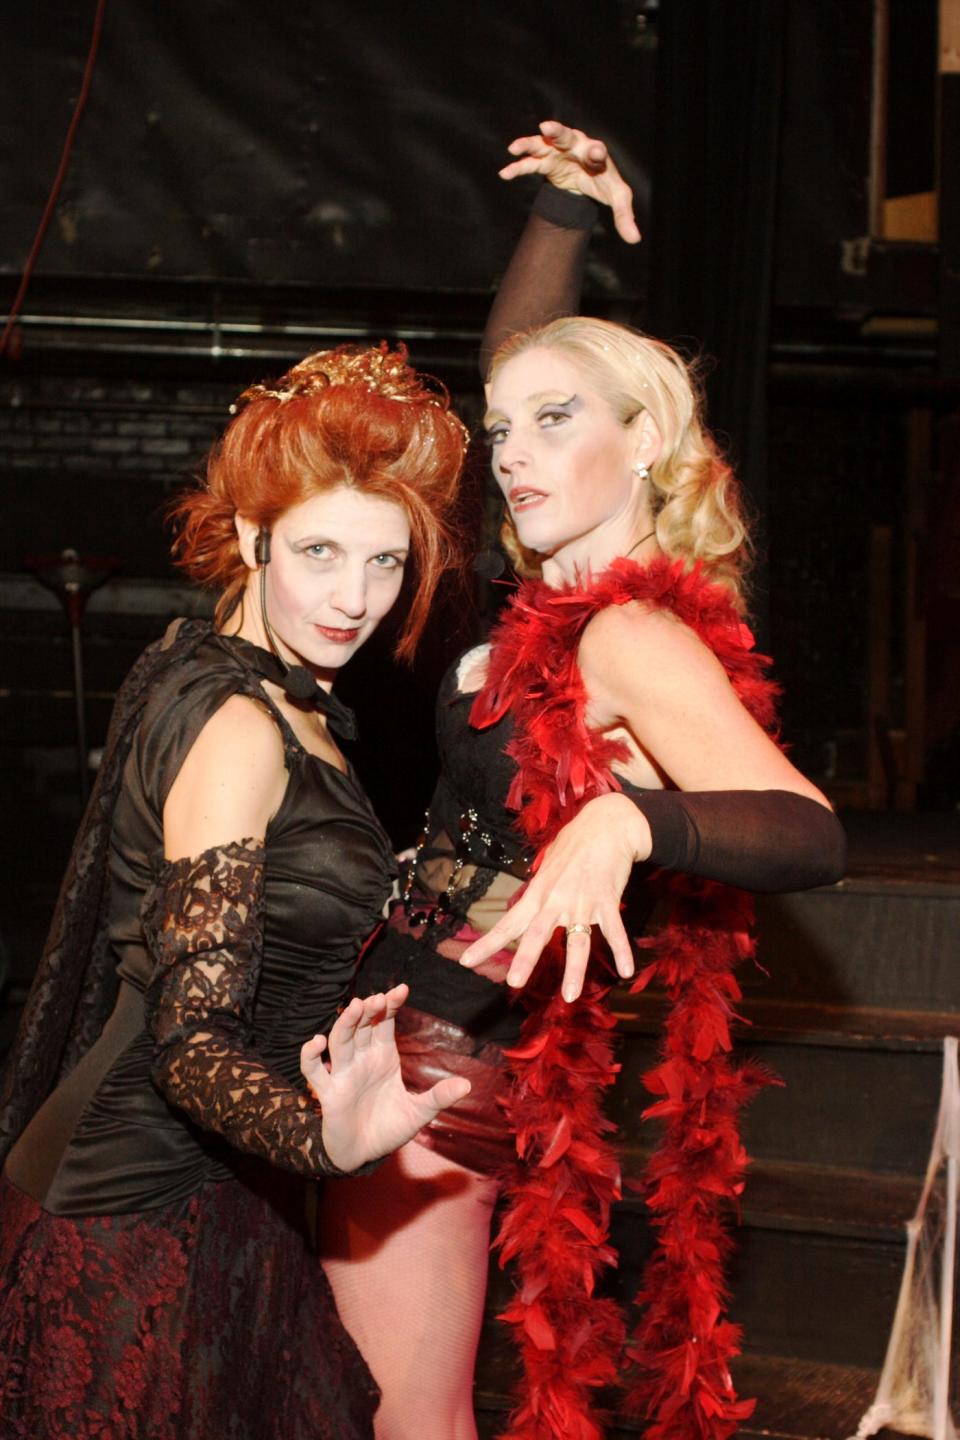 'Victoria Bledsoe' (left) played by Kelli Leigh-Ann Connors and 'Donna Shroud' played by Dianne Arabian.